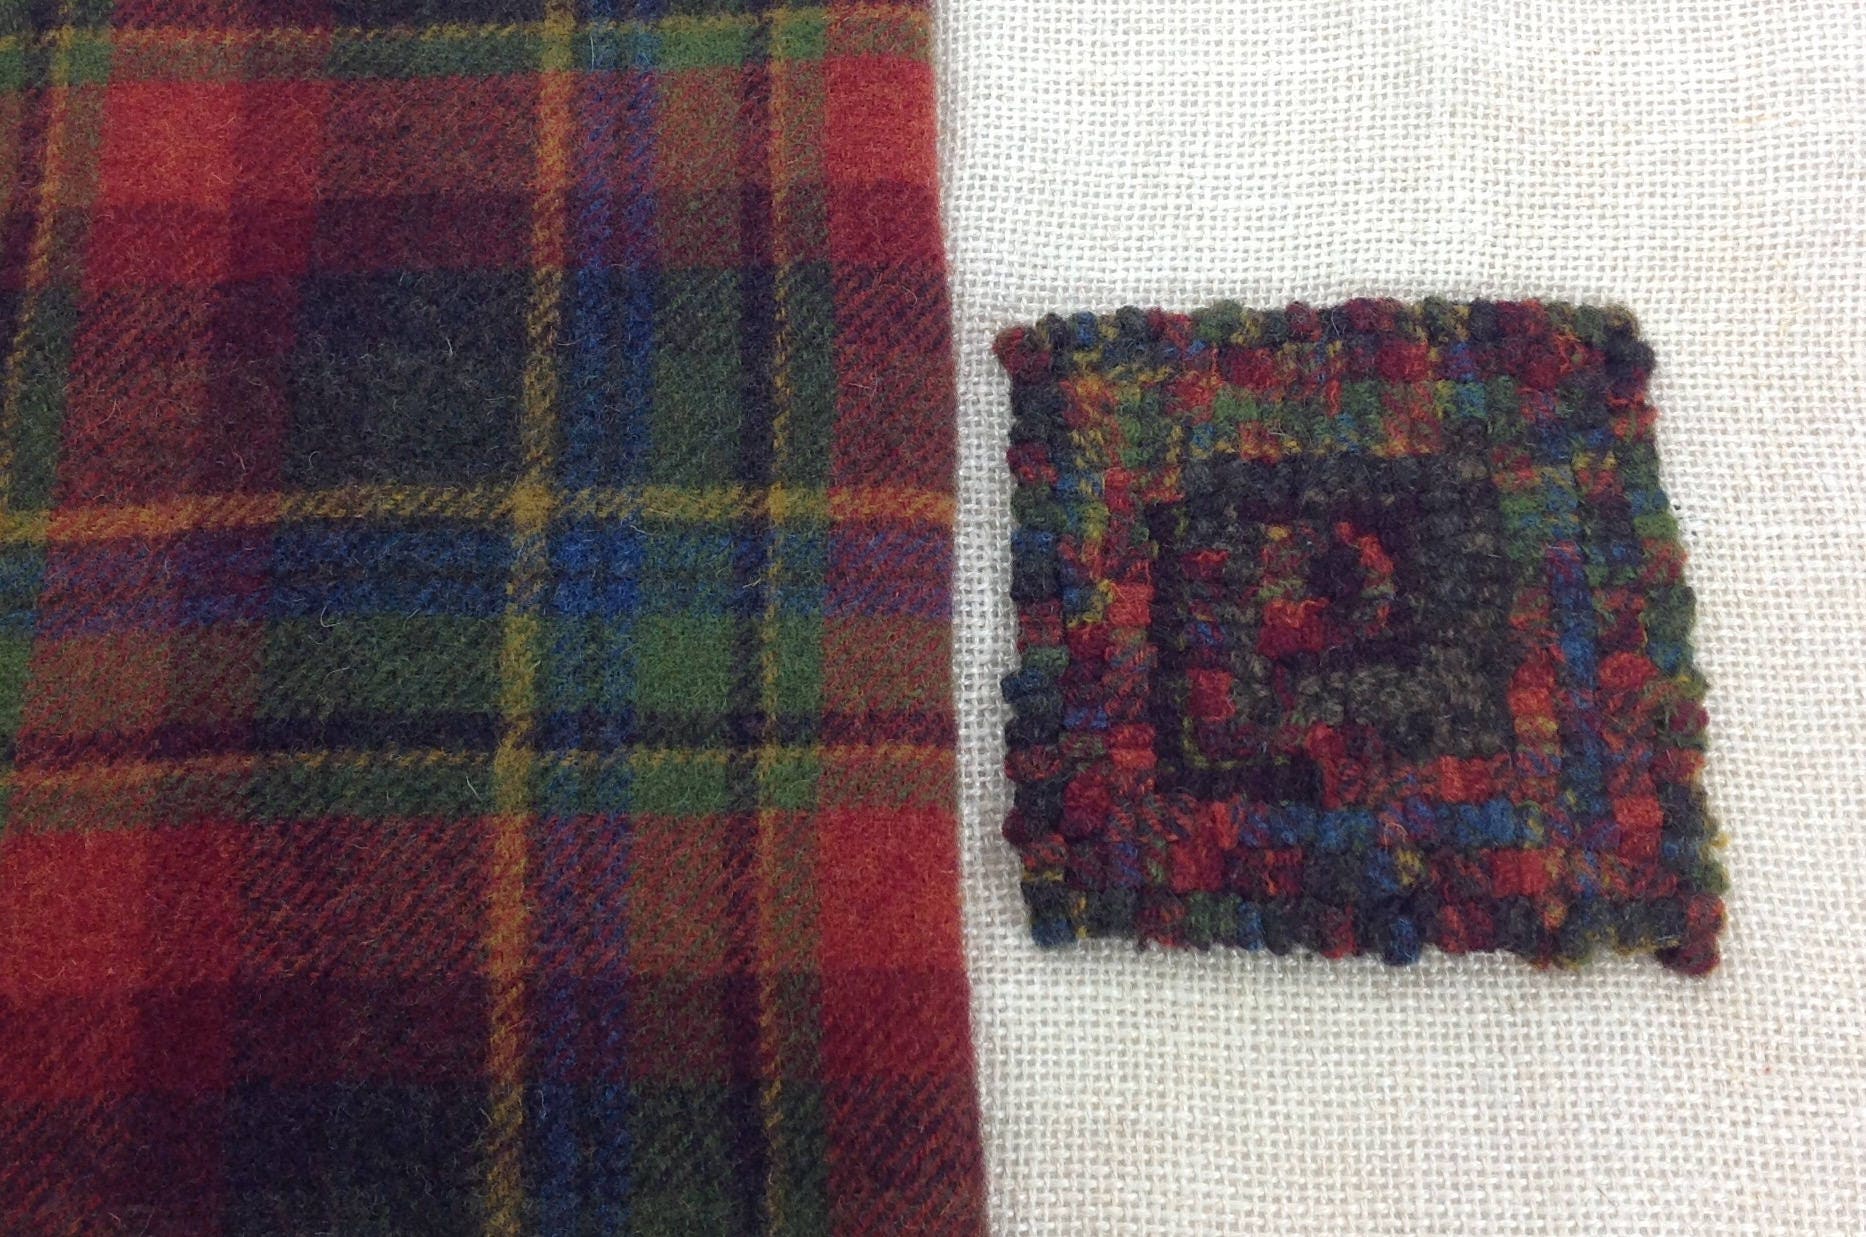 Fat 1/4 yard, Christmas Plaid, Mill Dyed Wool Fabric for Rug